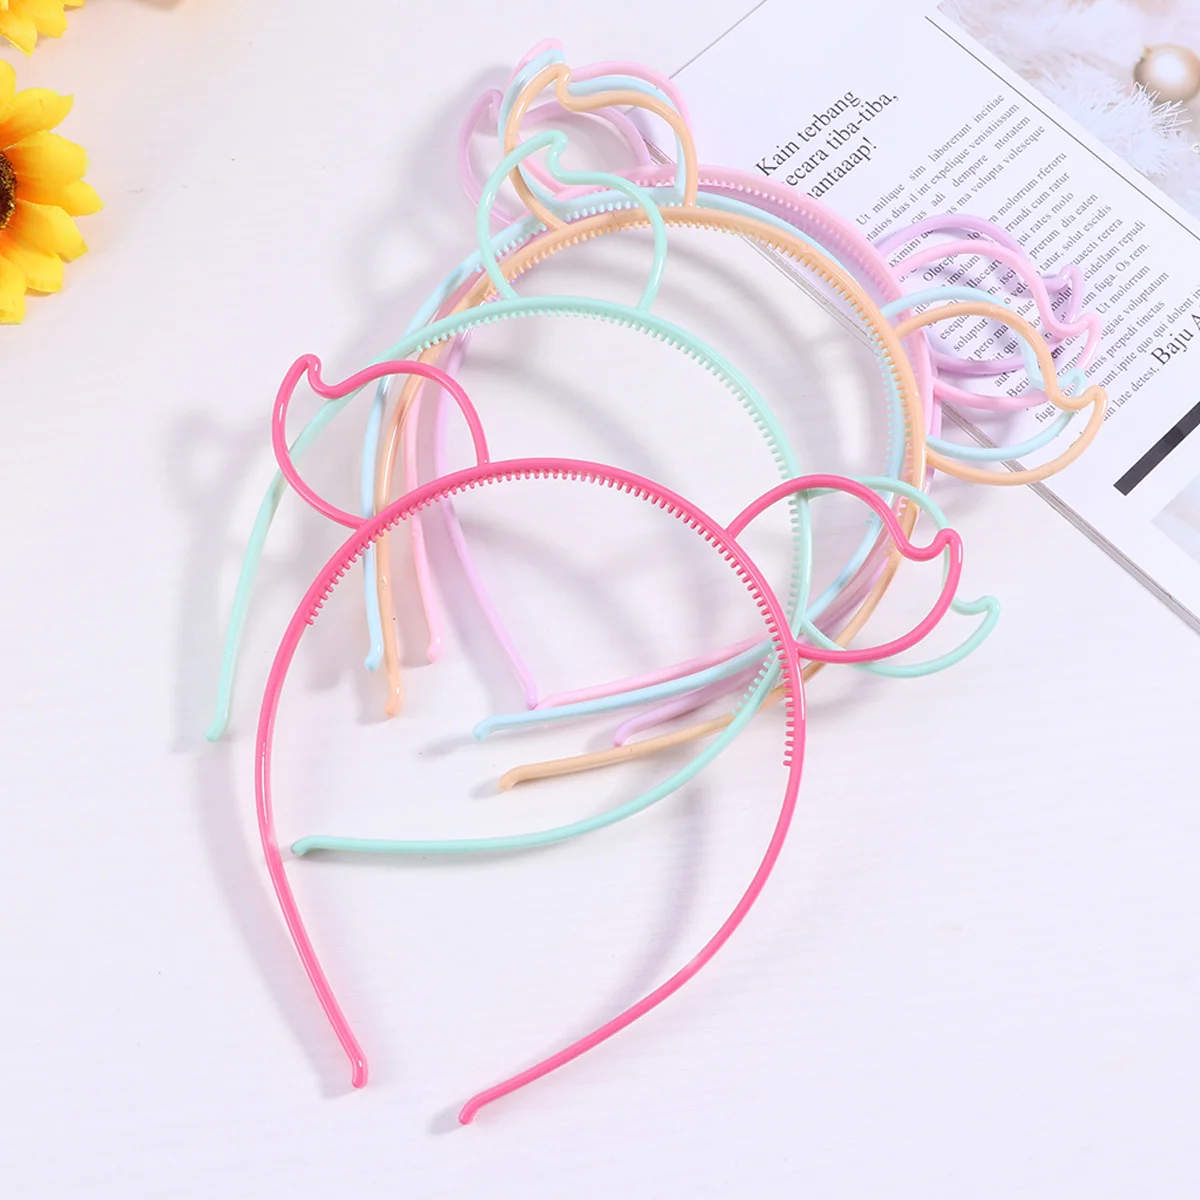 

12pcs Ears Plastic Girl Headbands Animal Ears Children Hairbands Party Accessories for Birthday Girls (Assorted Color)